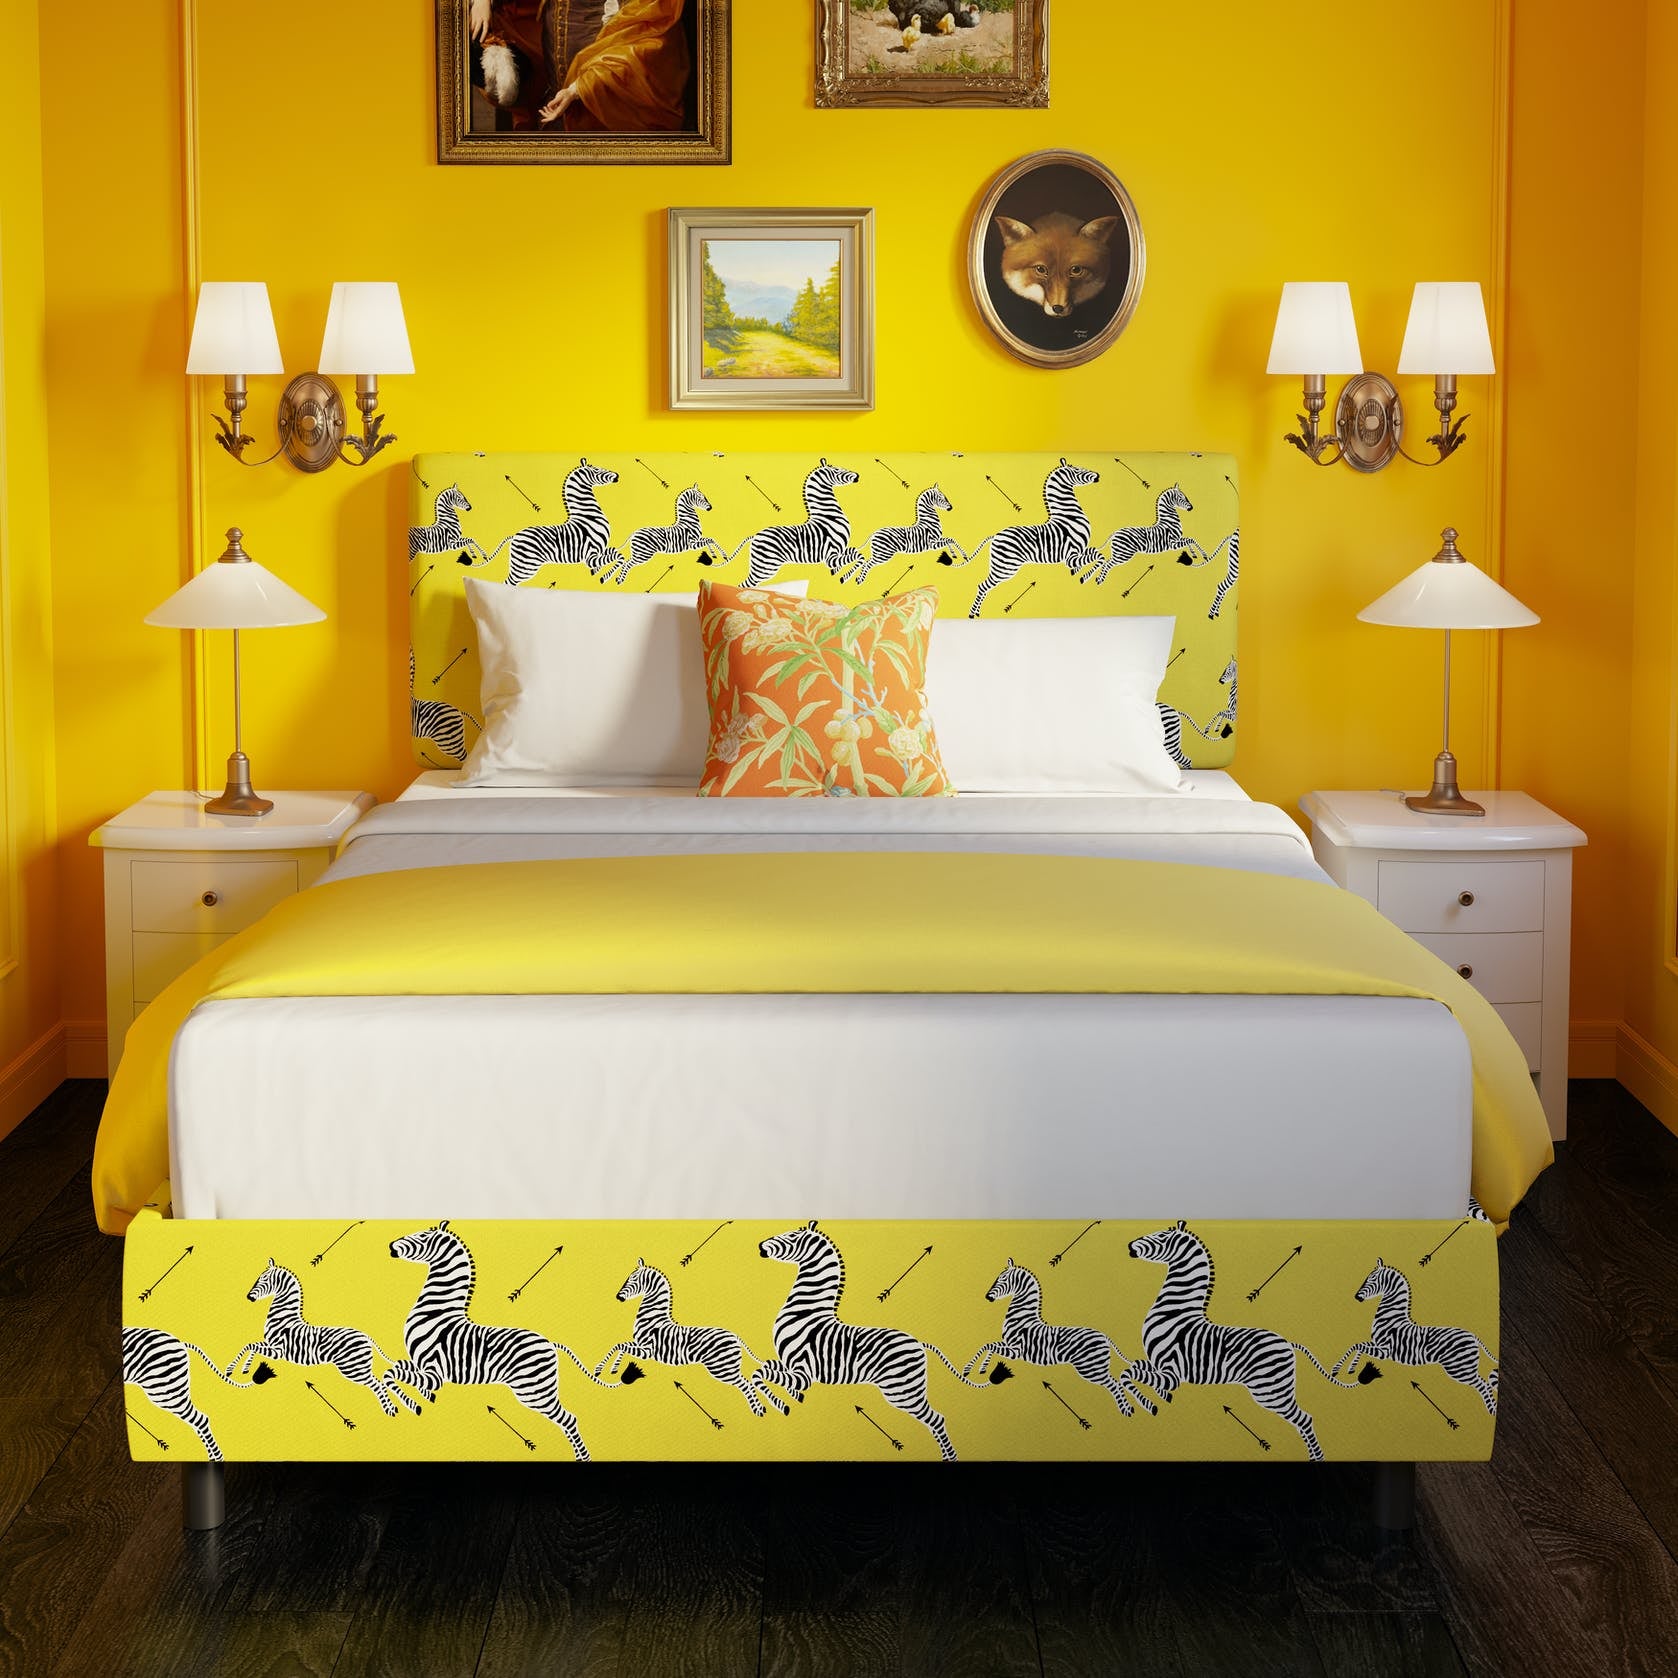 the yellow bed frame upholstered with Scalamandre zebra fabric